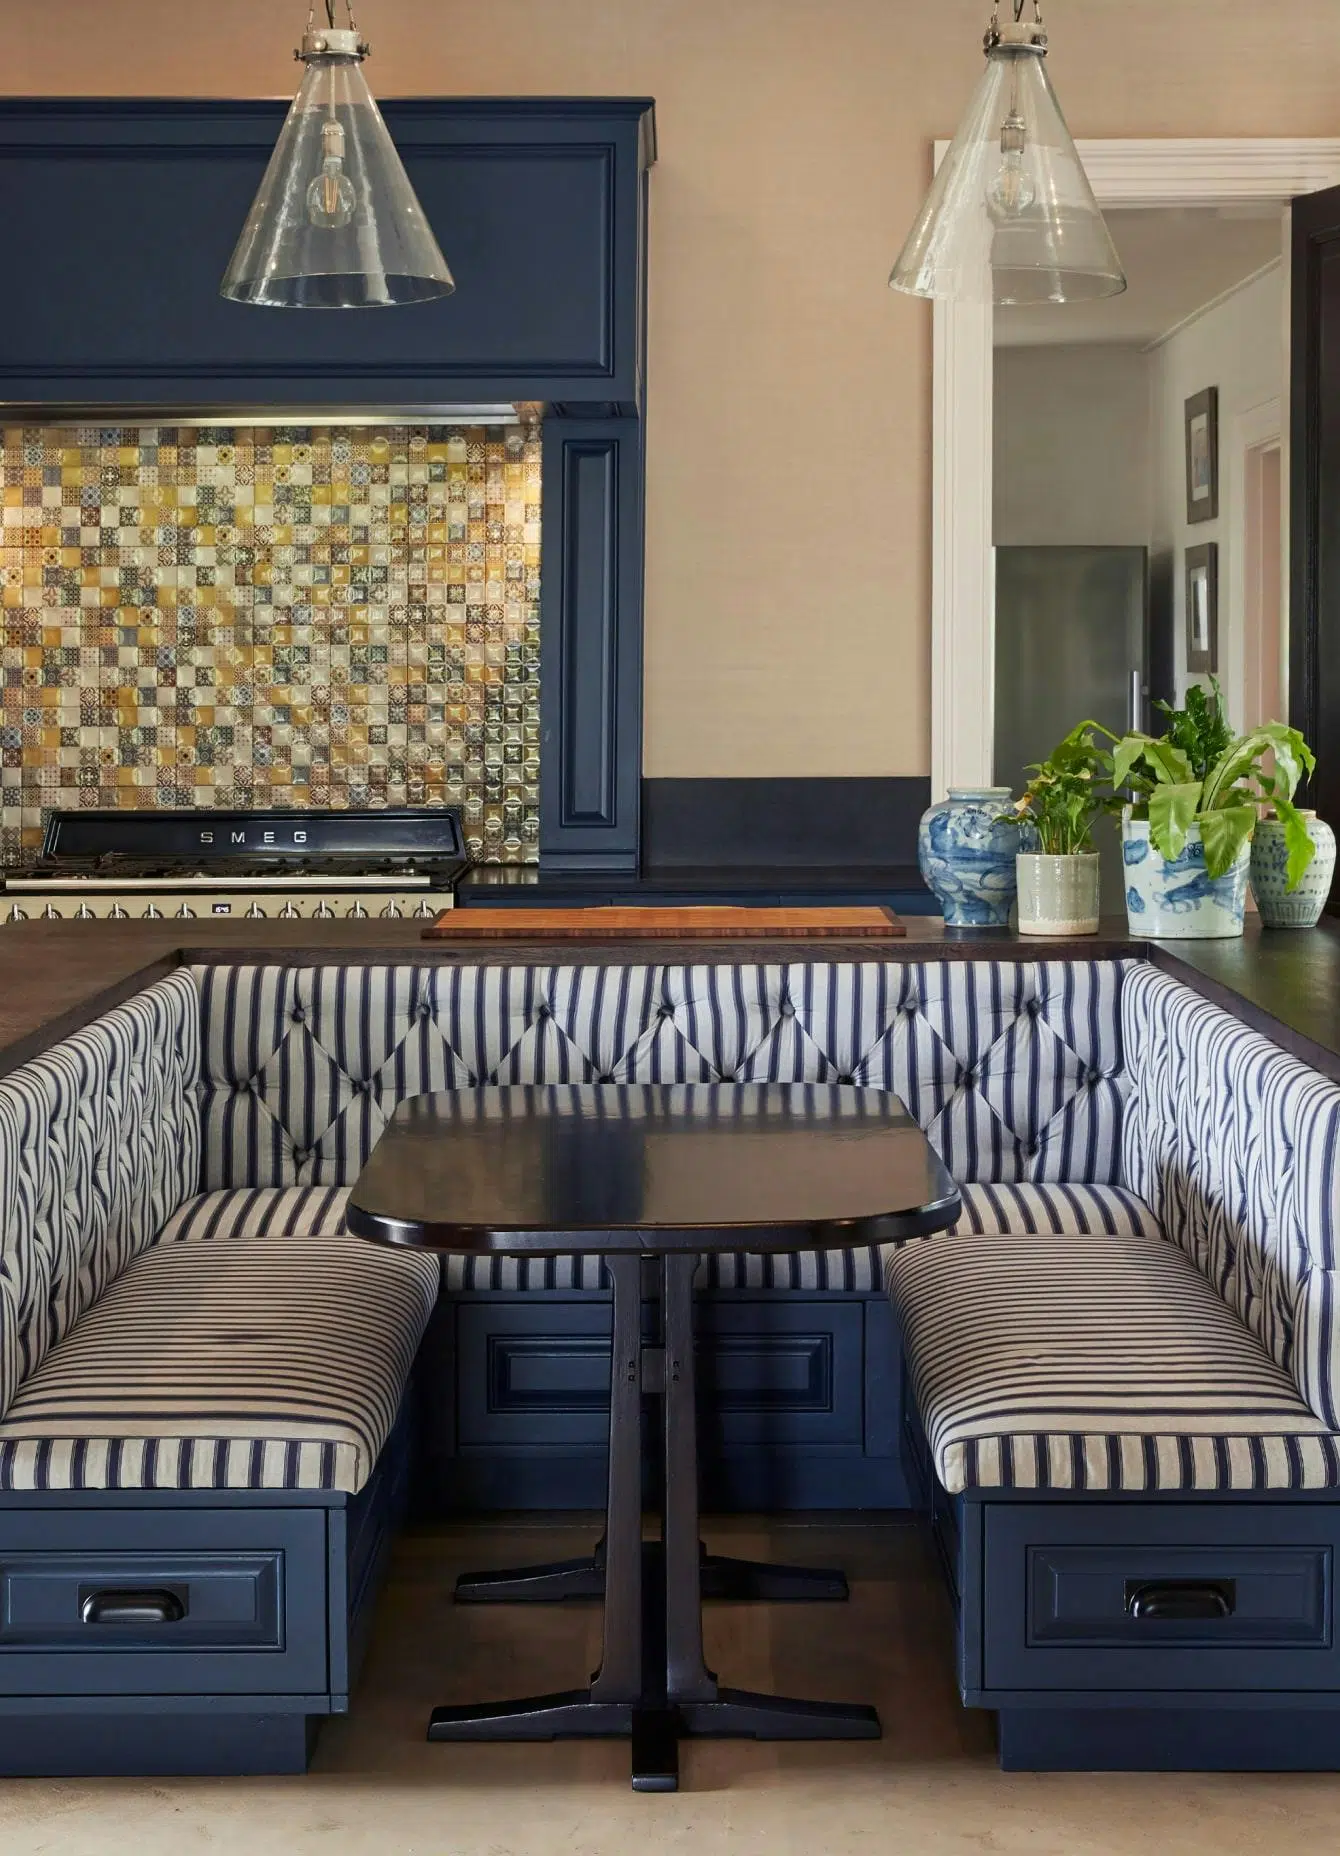 A kitchen banquette in a dark blue colour with a wooden top and black and white striped upholstery.